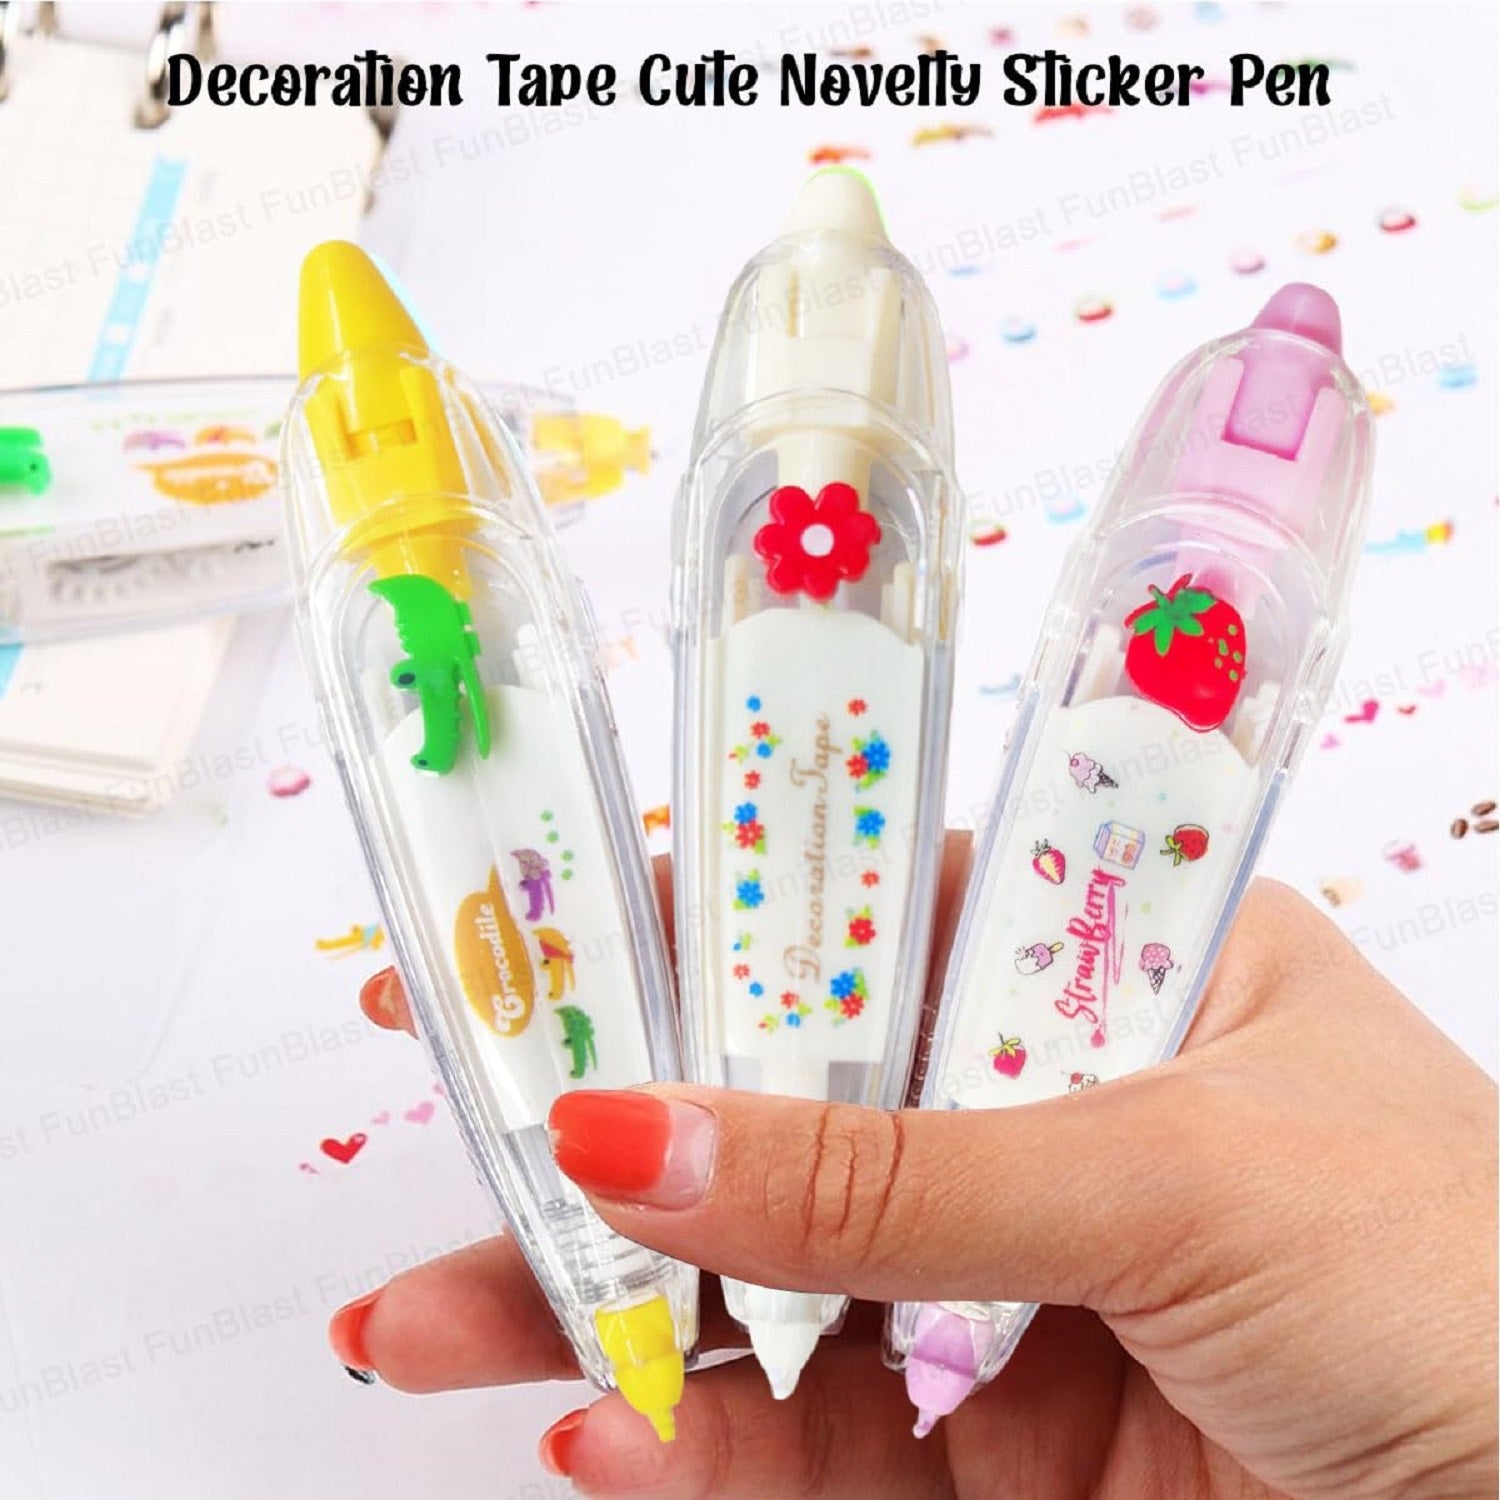 Roll on Decorative Food Tape (Like correction tape but with cute